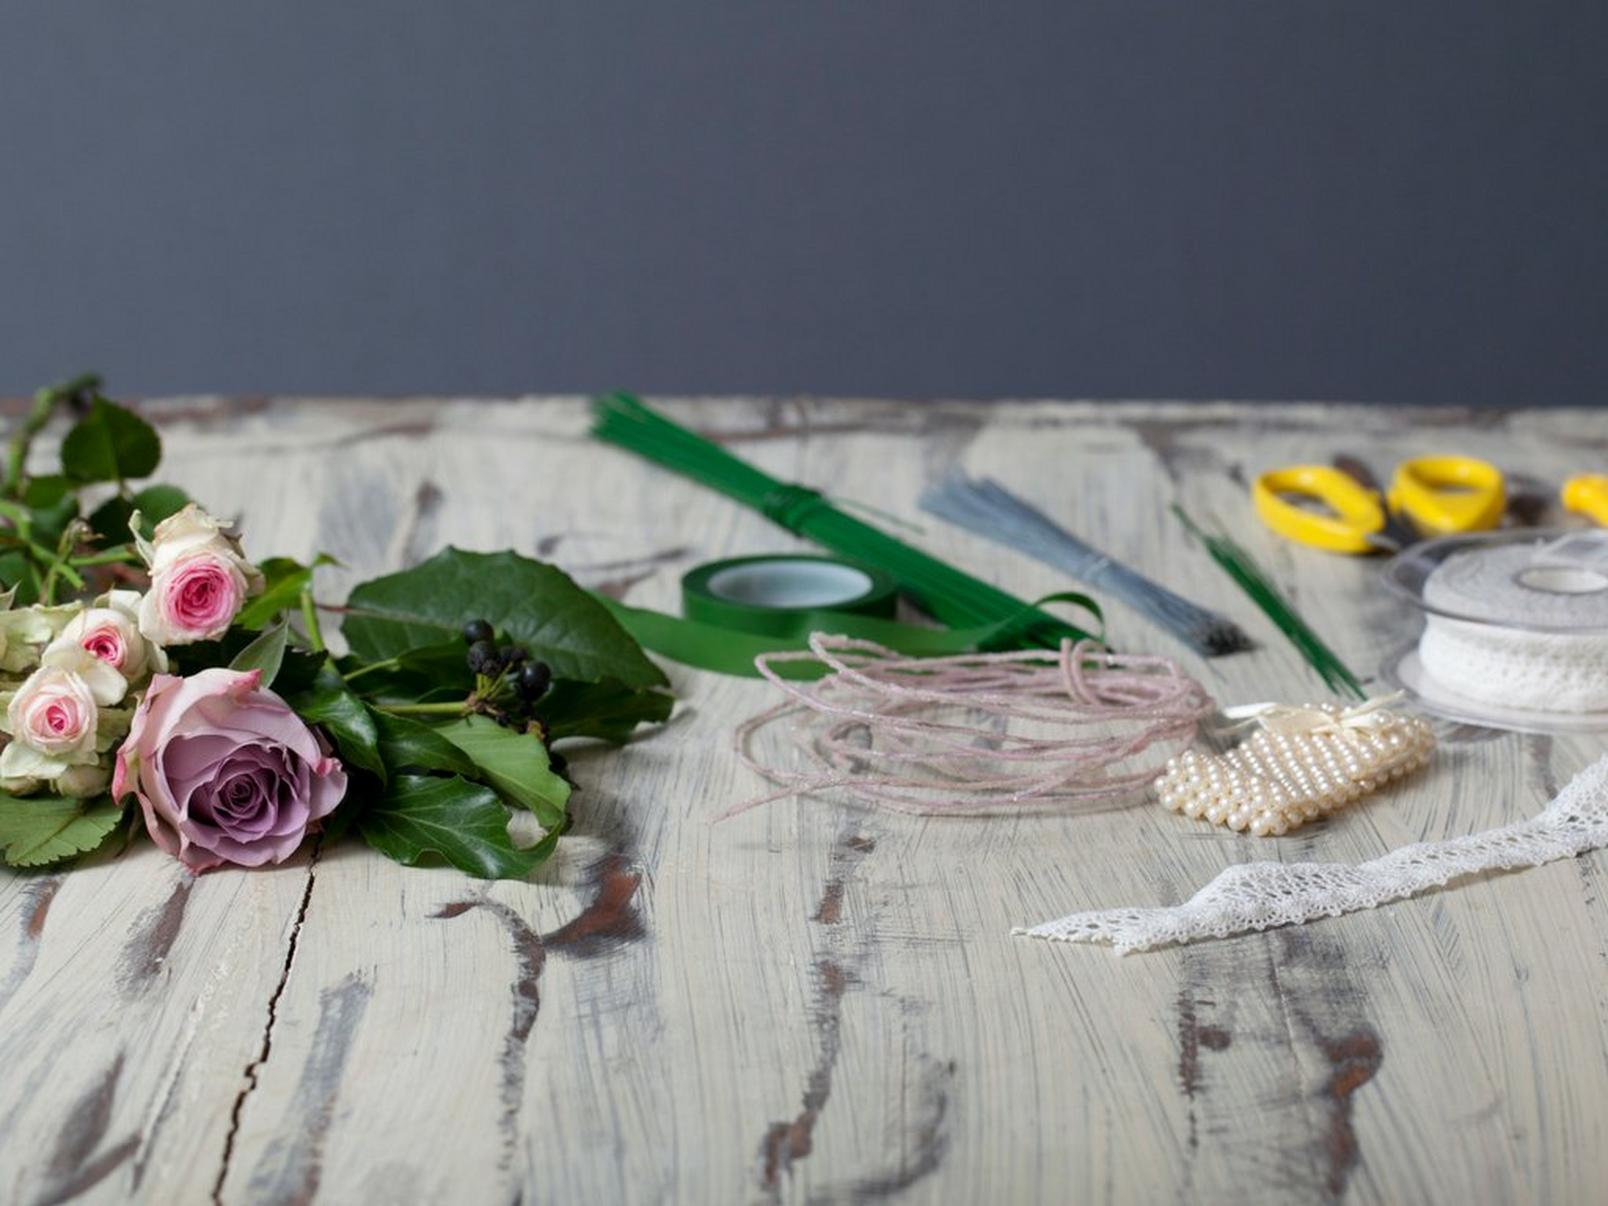 ingredients-to-make-corsage-rose-scissors-wire